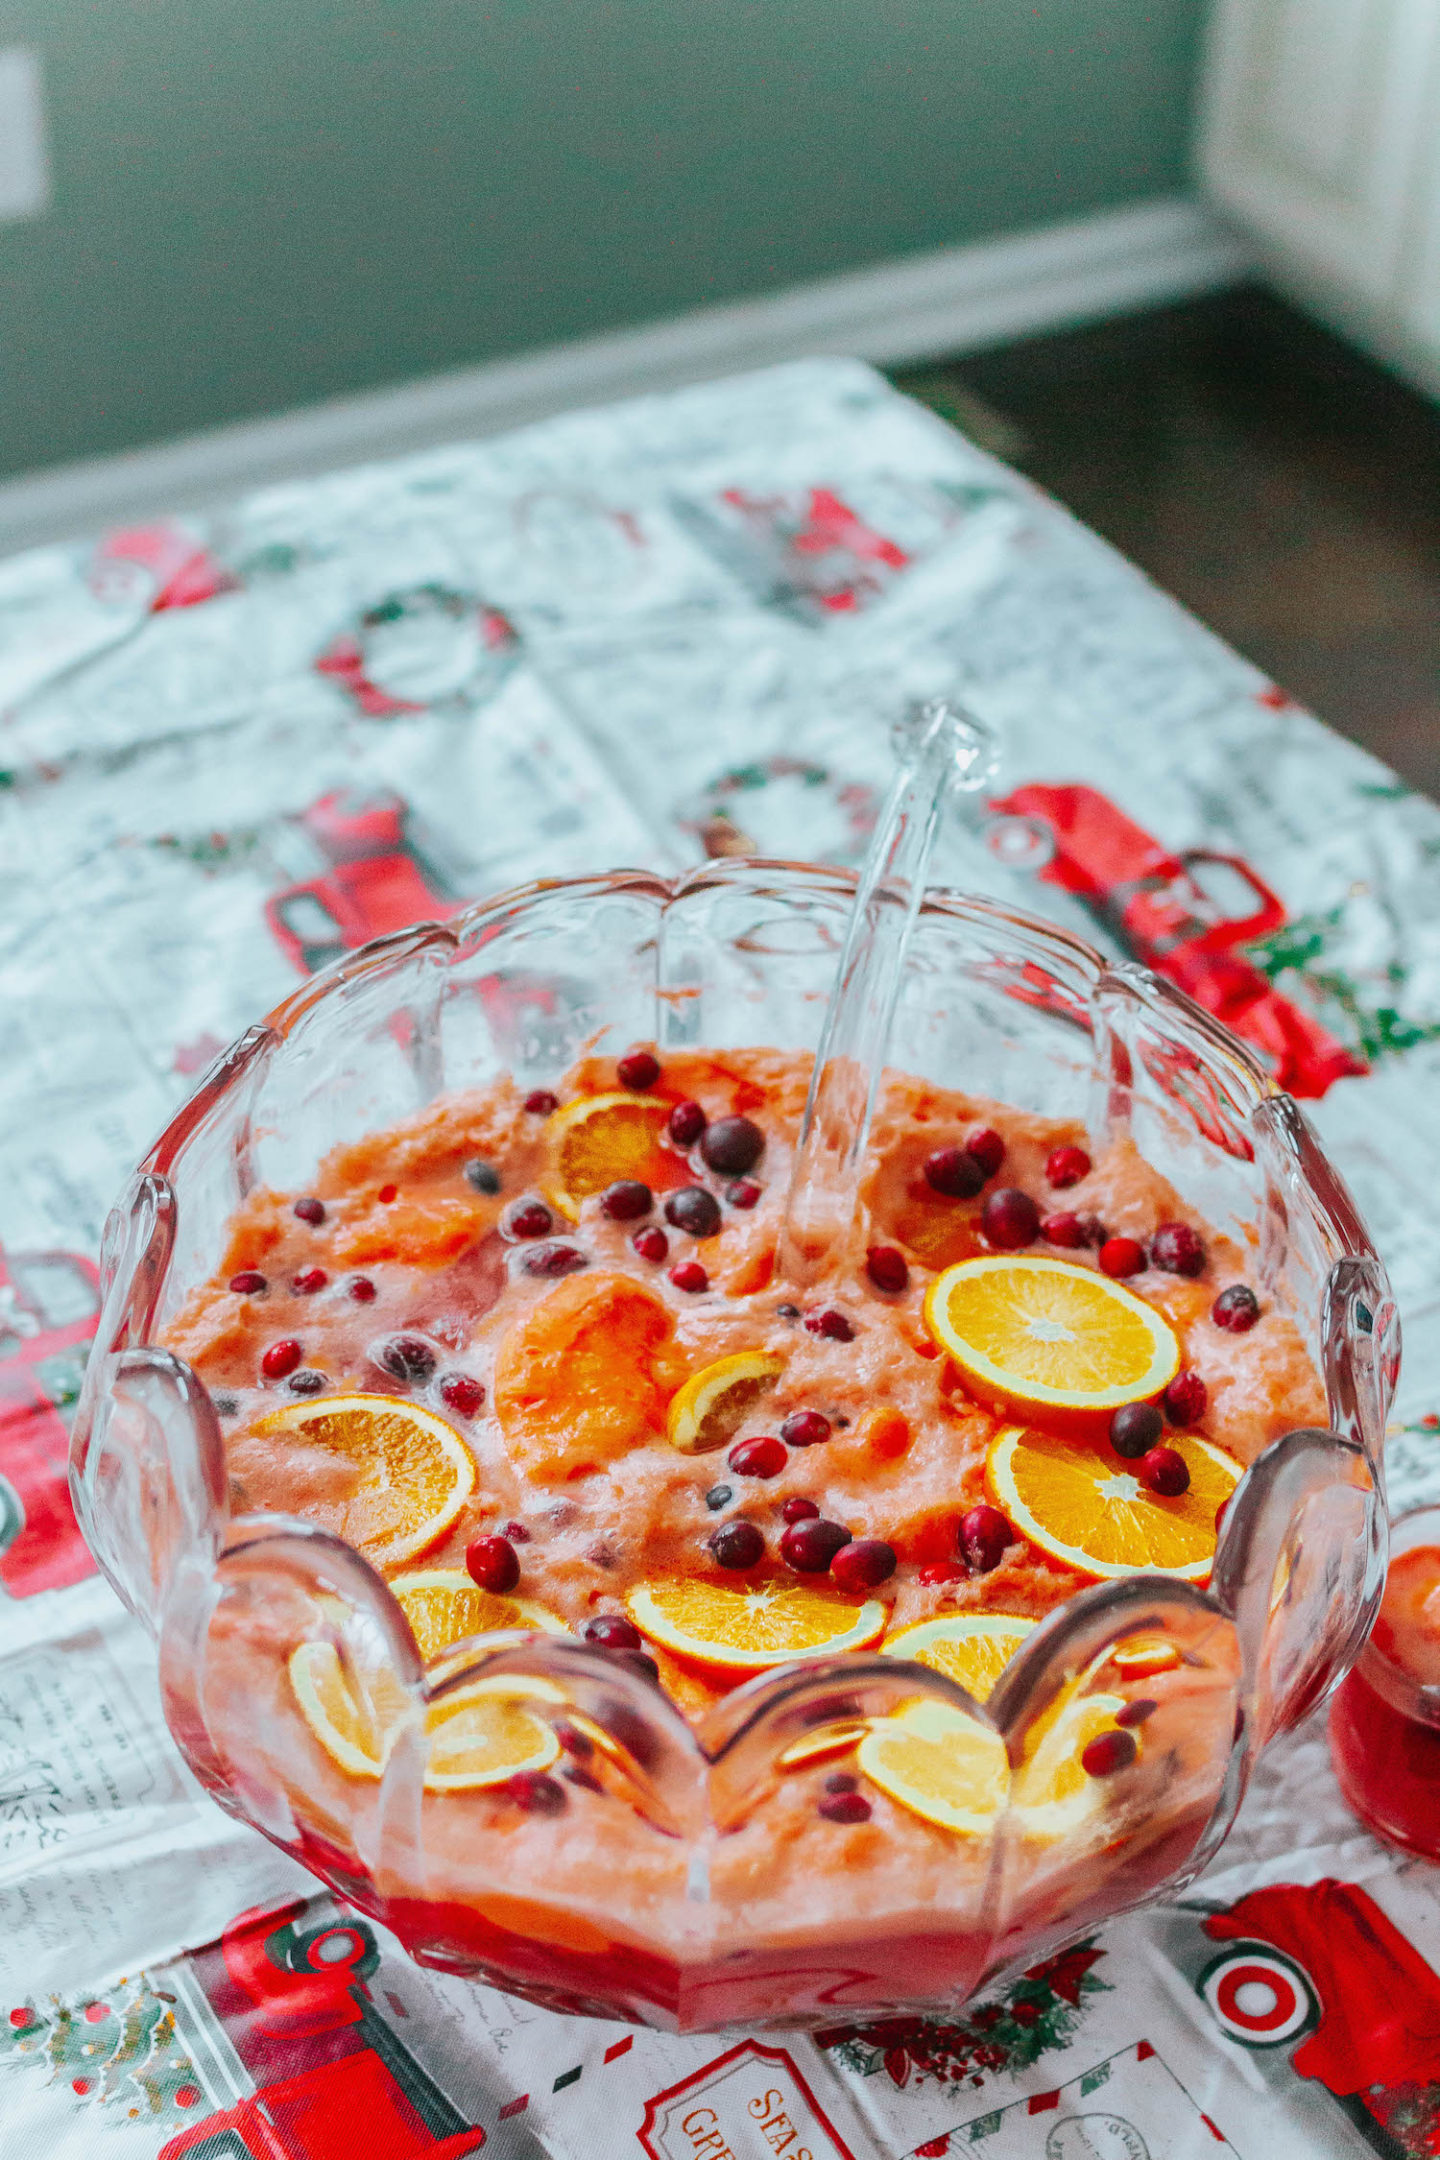 Punch Recipes with Ginger Ale